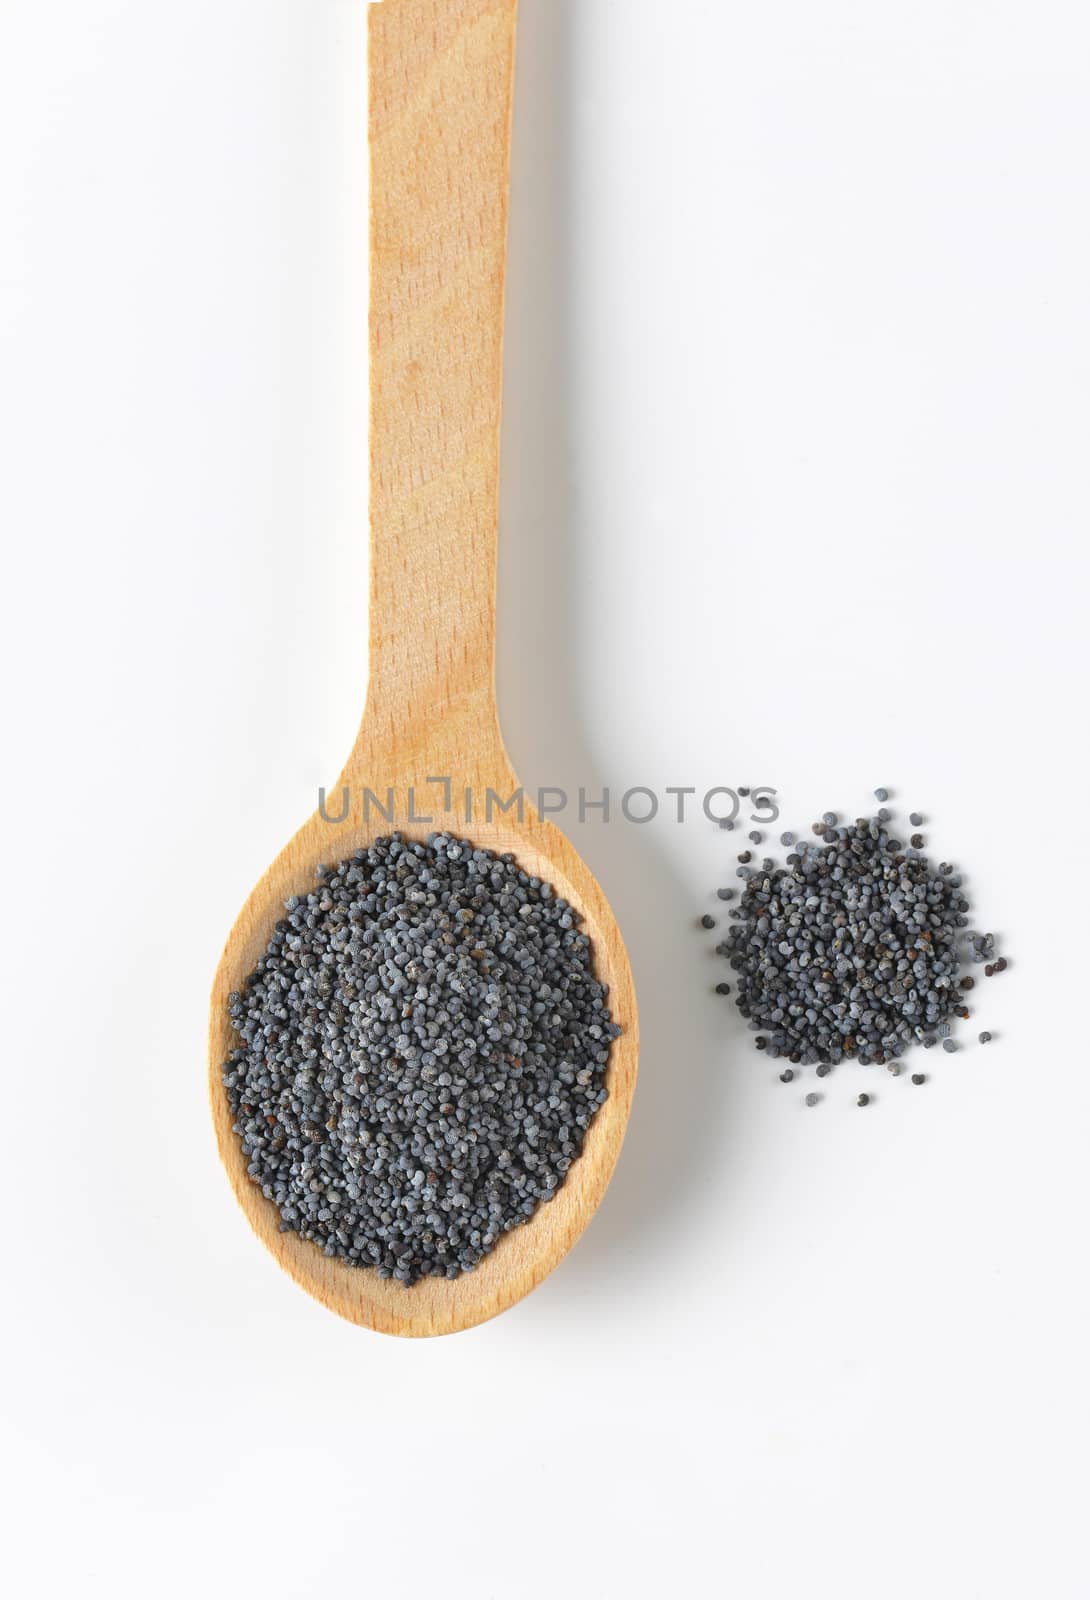 whole ripe poppy seeds on small wooden spoon